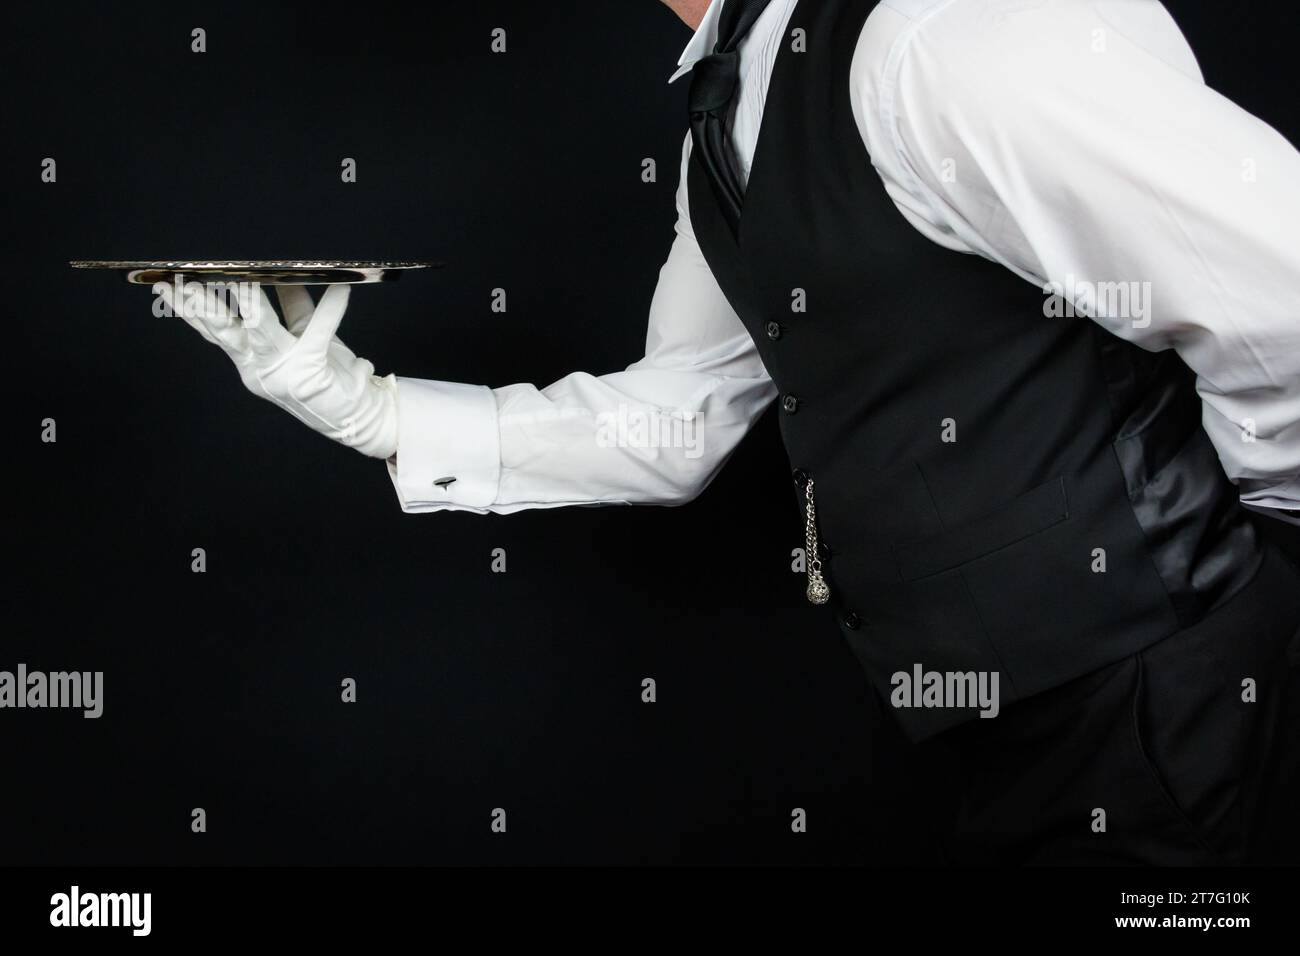 Portrait of Butler or Waiter in White Gloves Holding Silver Serving Tray. Concept of Service Industry and Professional Hospitality. Stock Photo